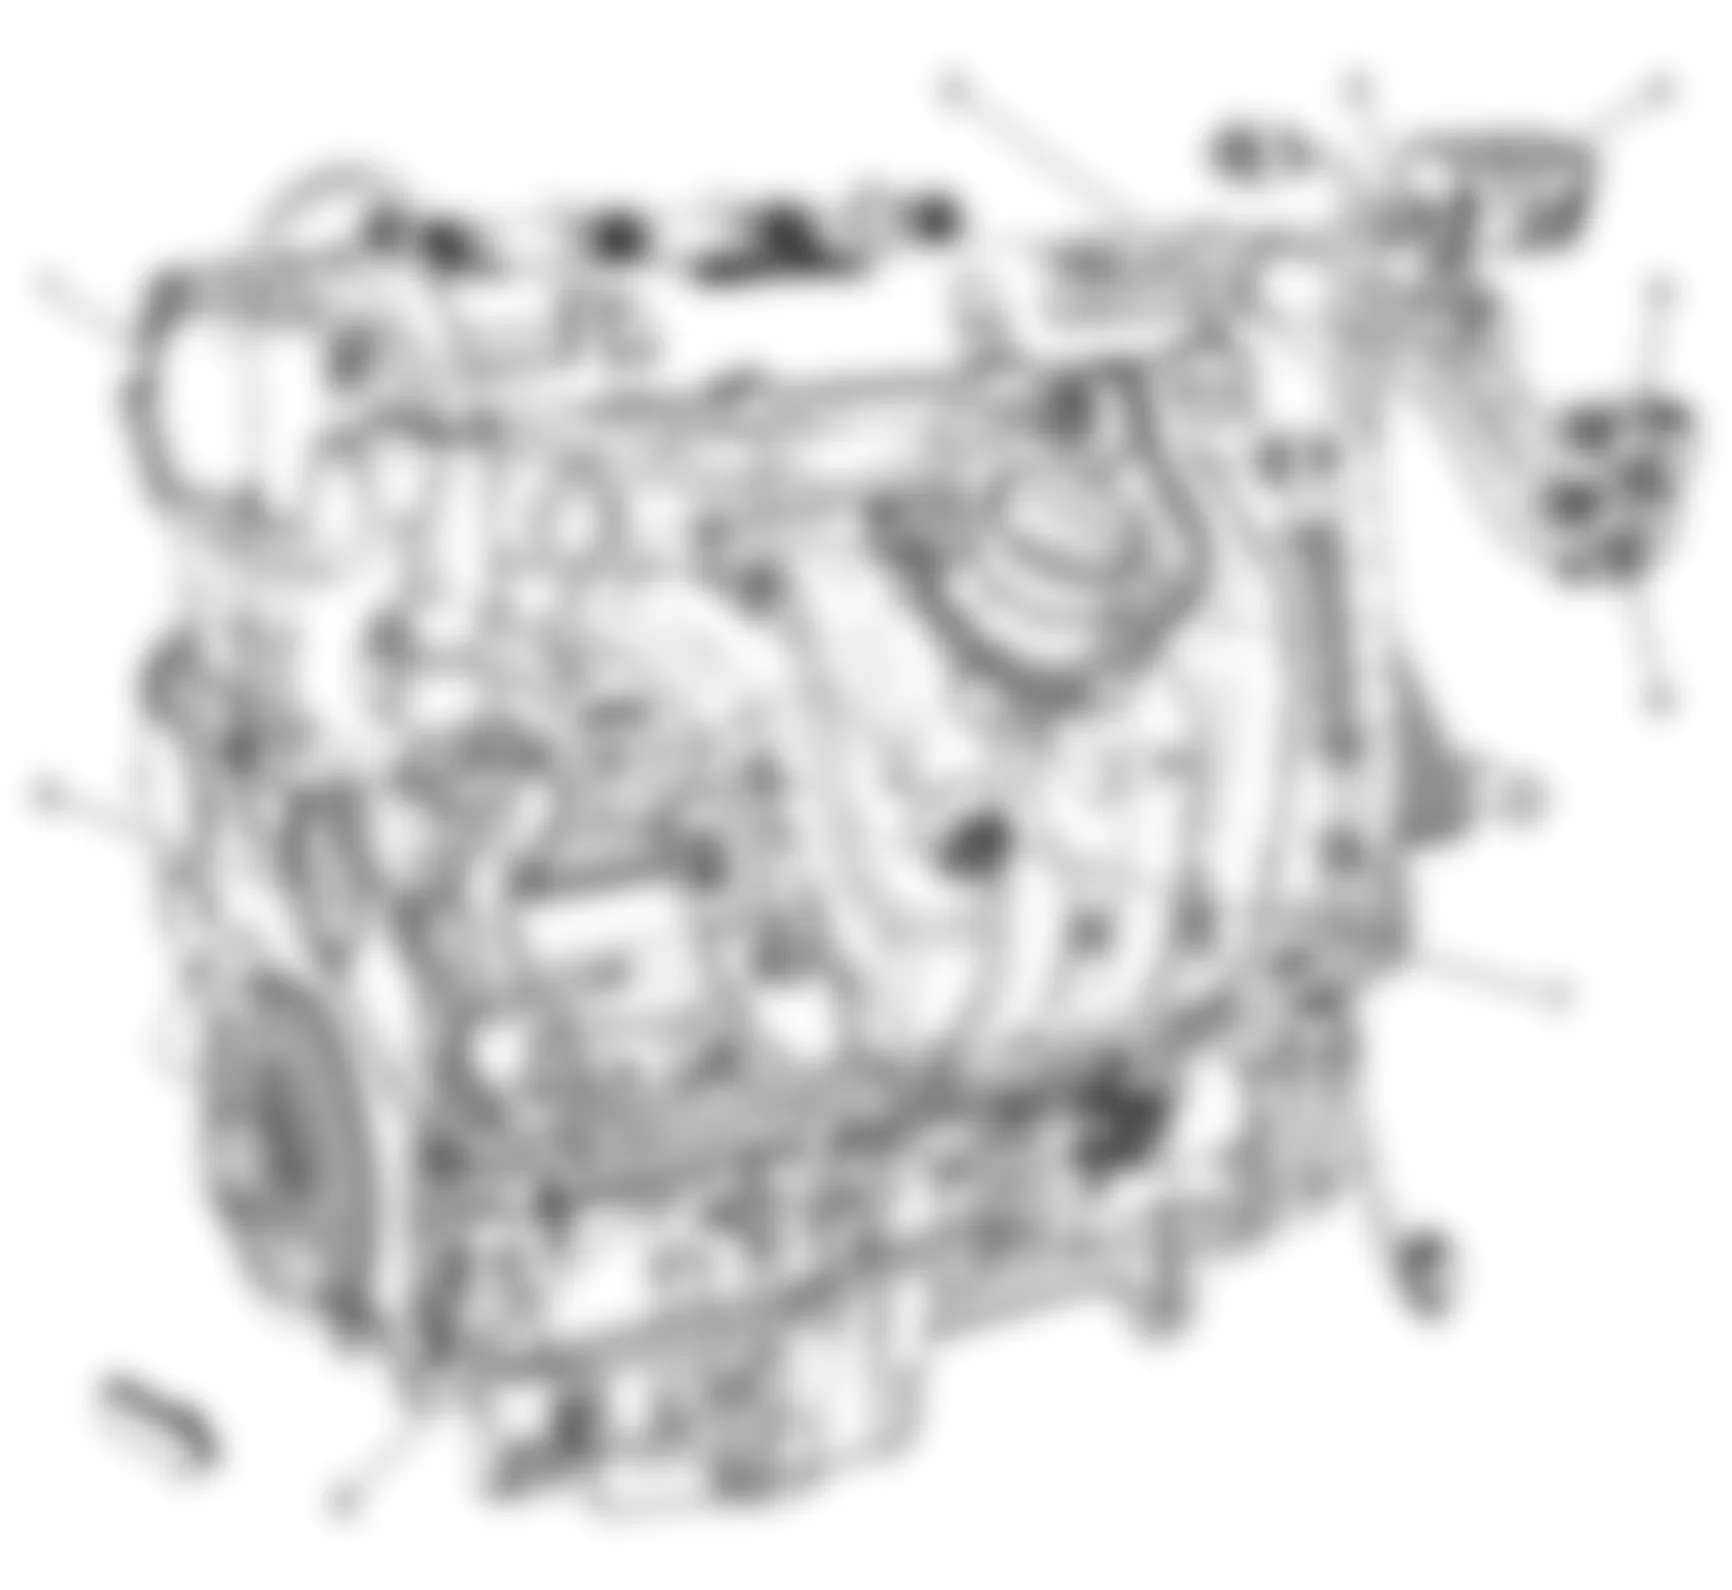 Chevrolet HHR LT 2010 - Component Locations -  Left Side Of Engine (2.4L)